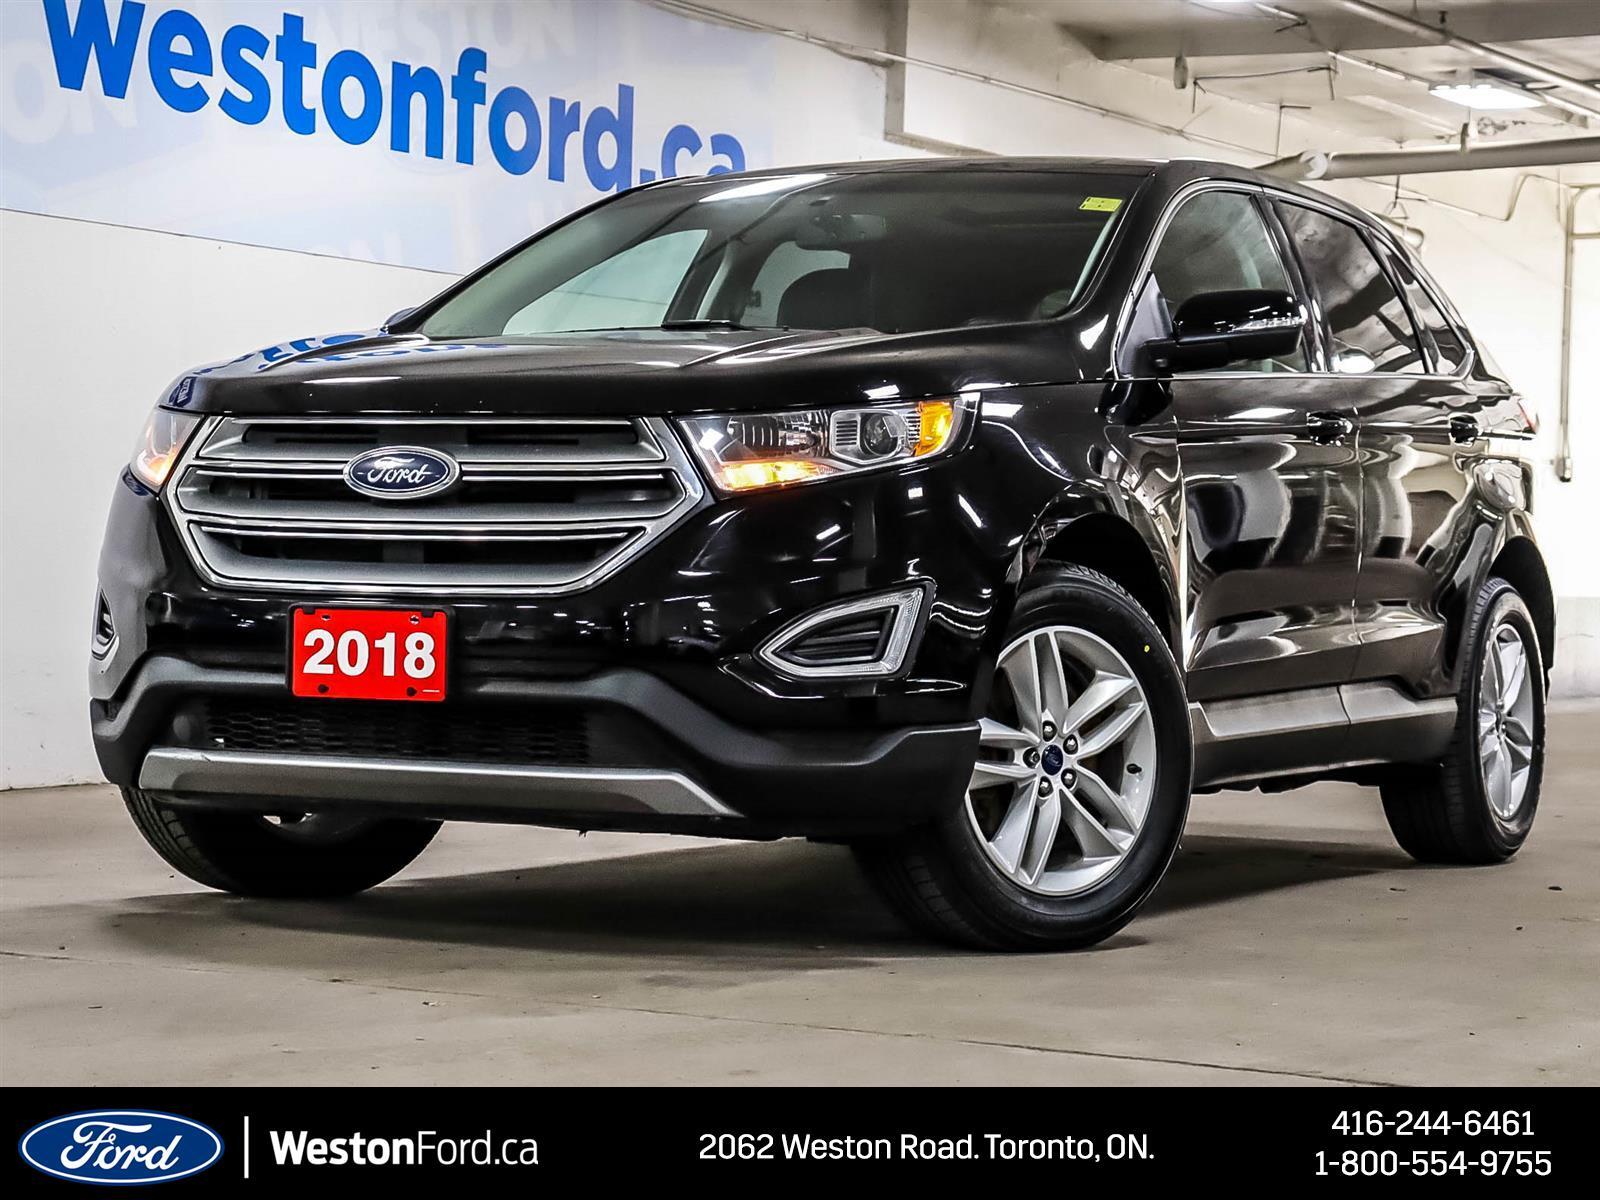 2018 Ford Edge SEL+PANROOF+REV CANM+NAVIGATION+LEATHER 